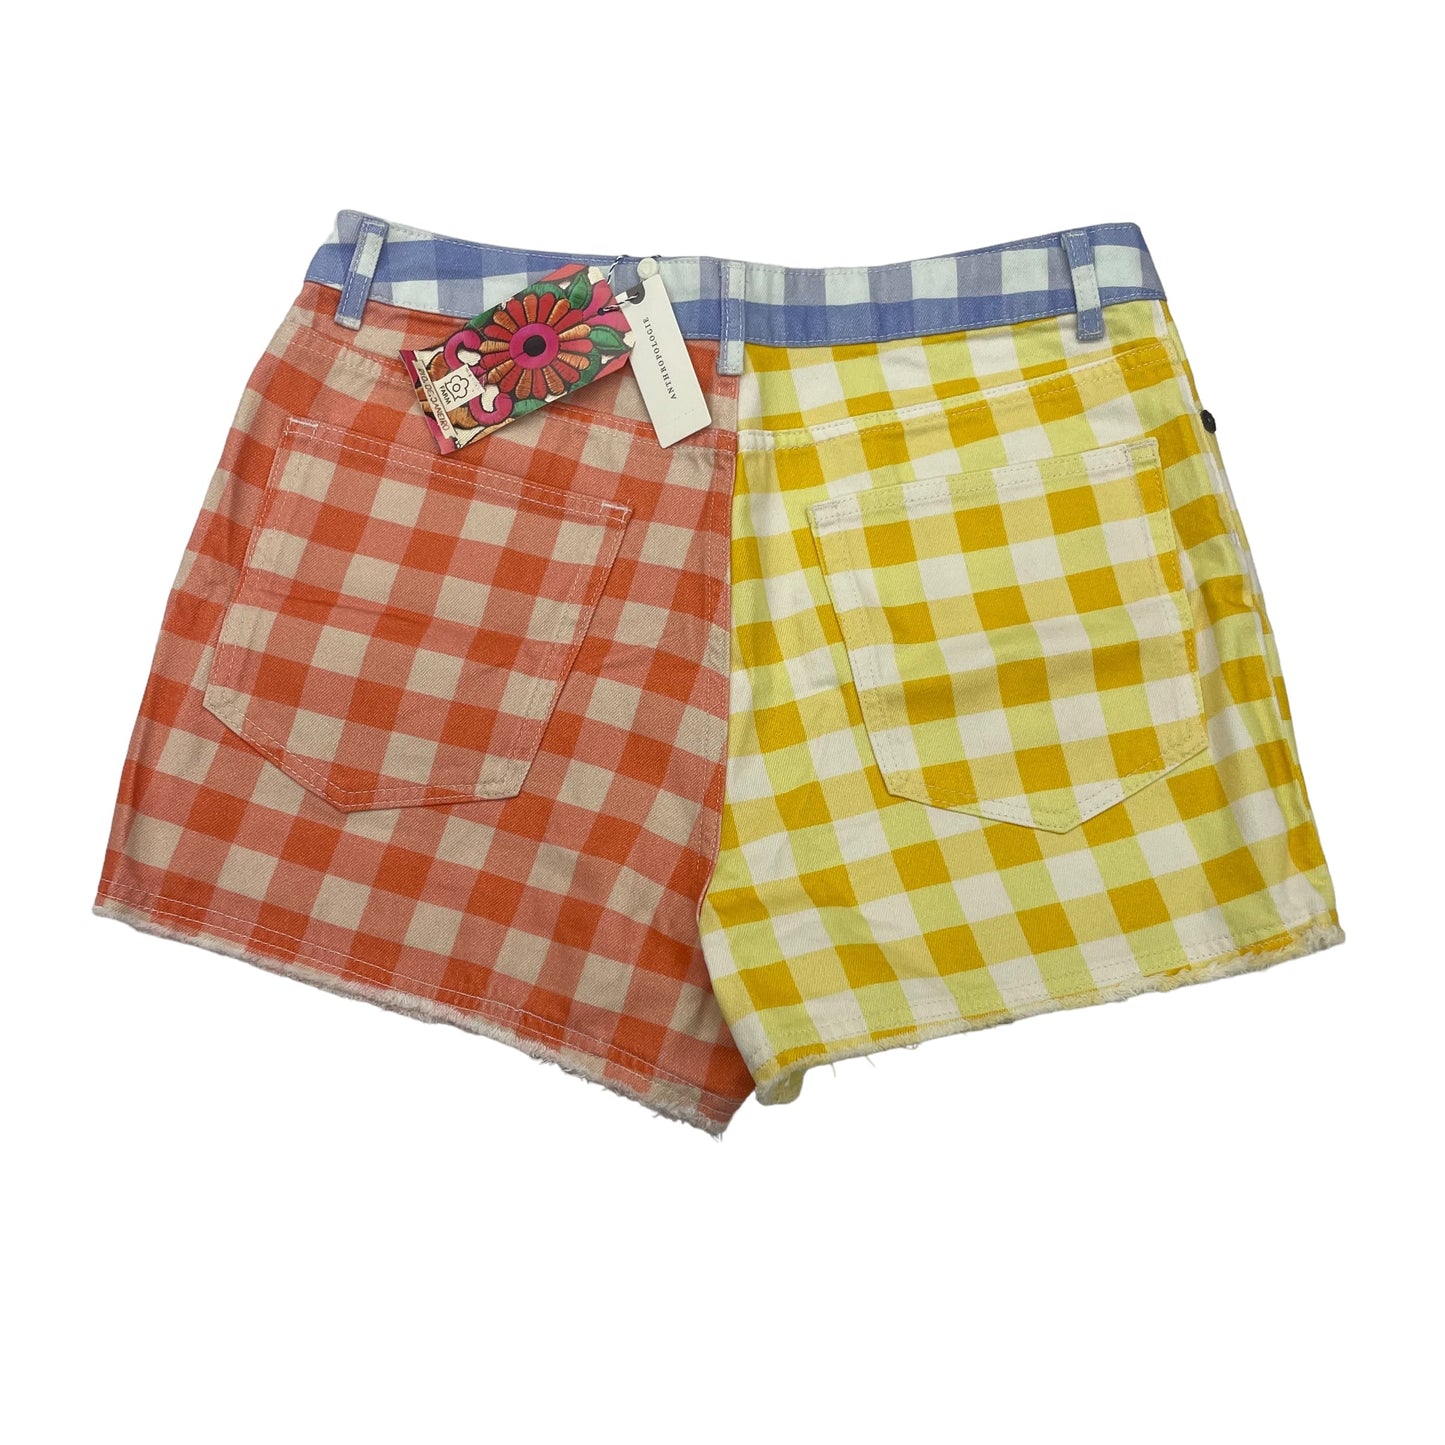 RED & YELLOW ANTHROPOLOGIE SHORTS, Size L